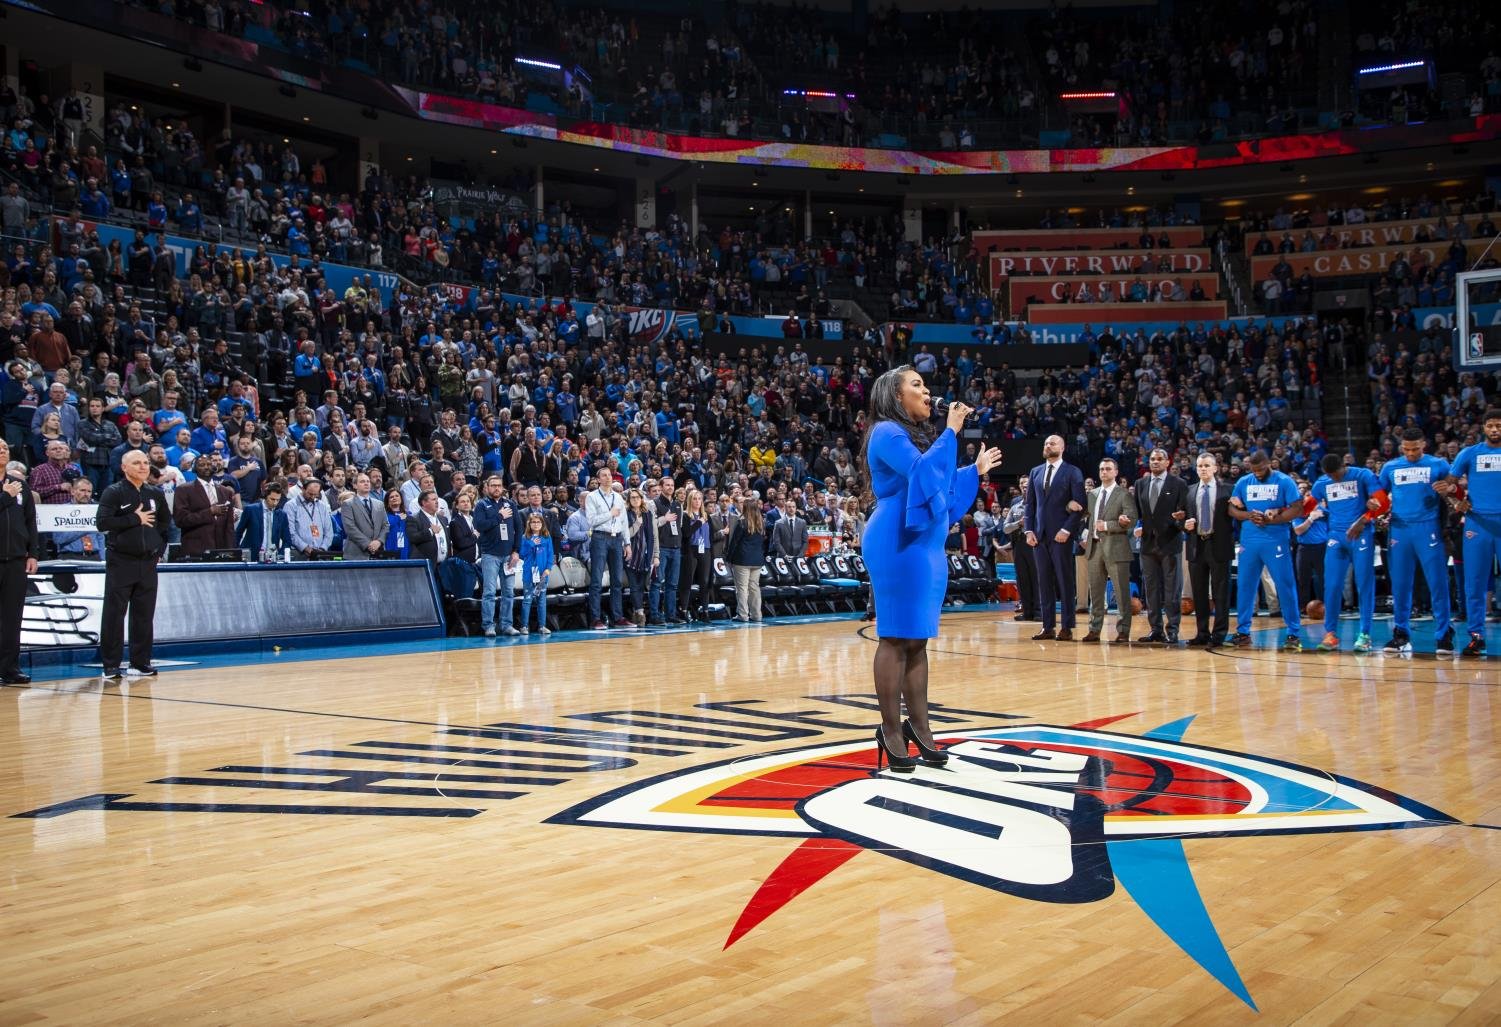 2019, Mary made her National  Basketball Association (NBA) debut returning to her home state of  Oklahoma to perform the  National Anthem for the Oklahoma City Thunder vs. Orlando Magic NBA game.